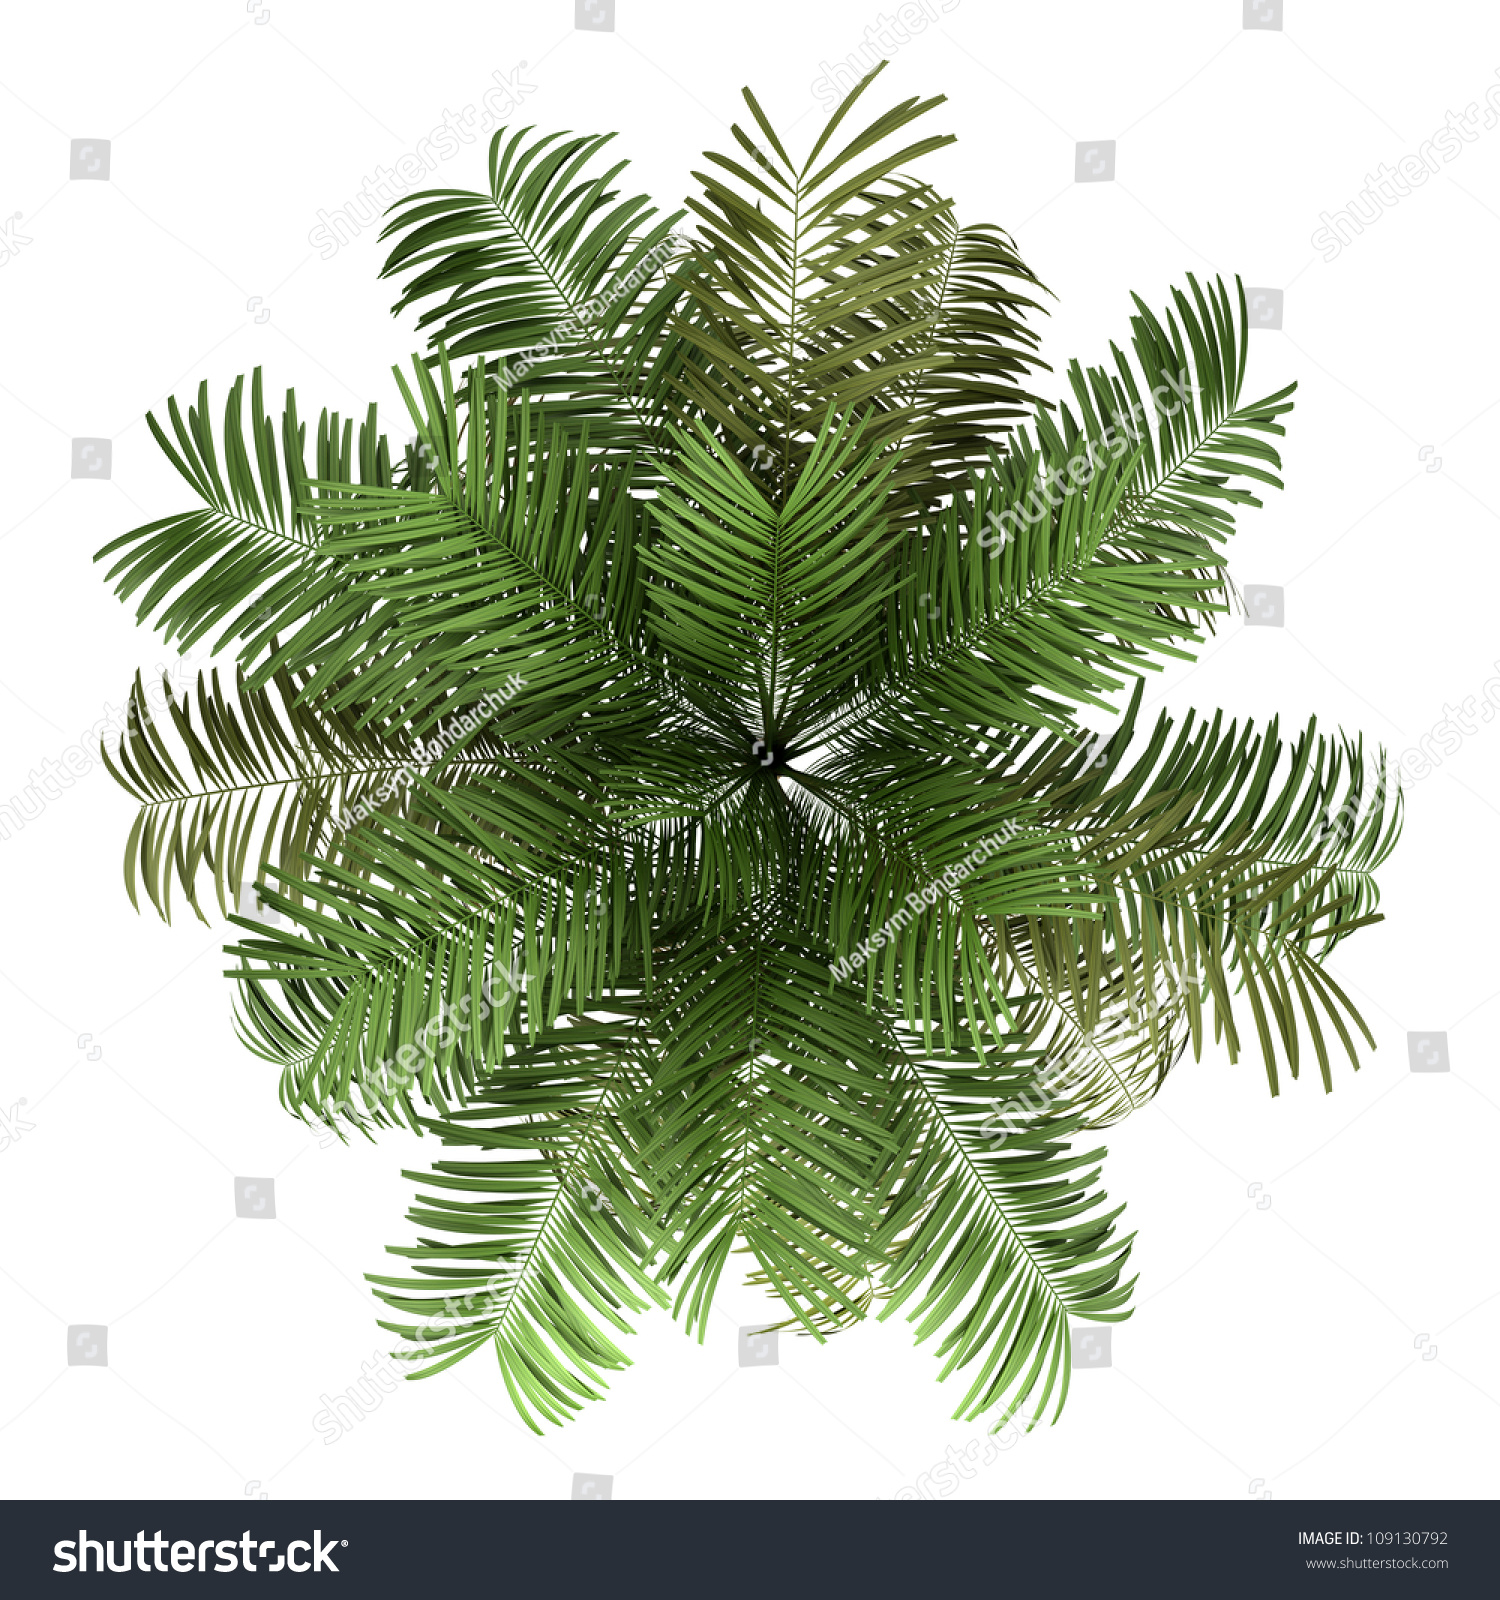 Top View Areca Palm Tree Isolated Stock Illustration 109130792 ...